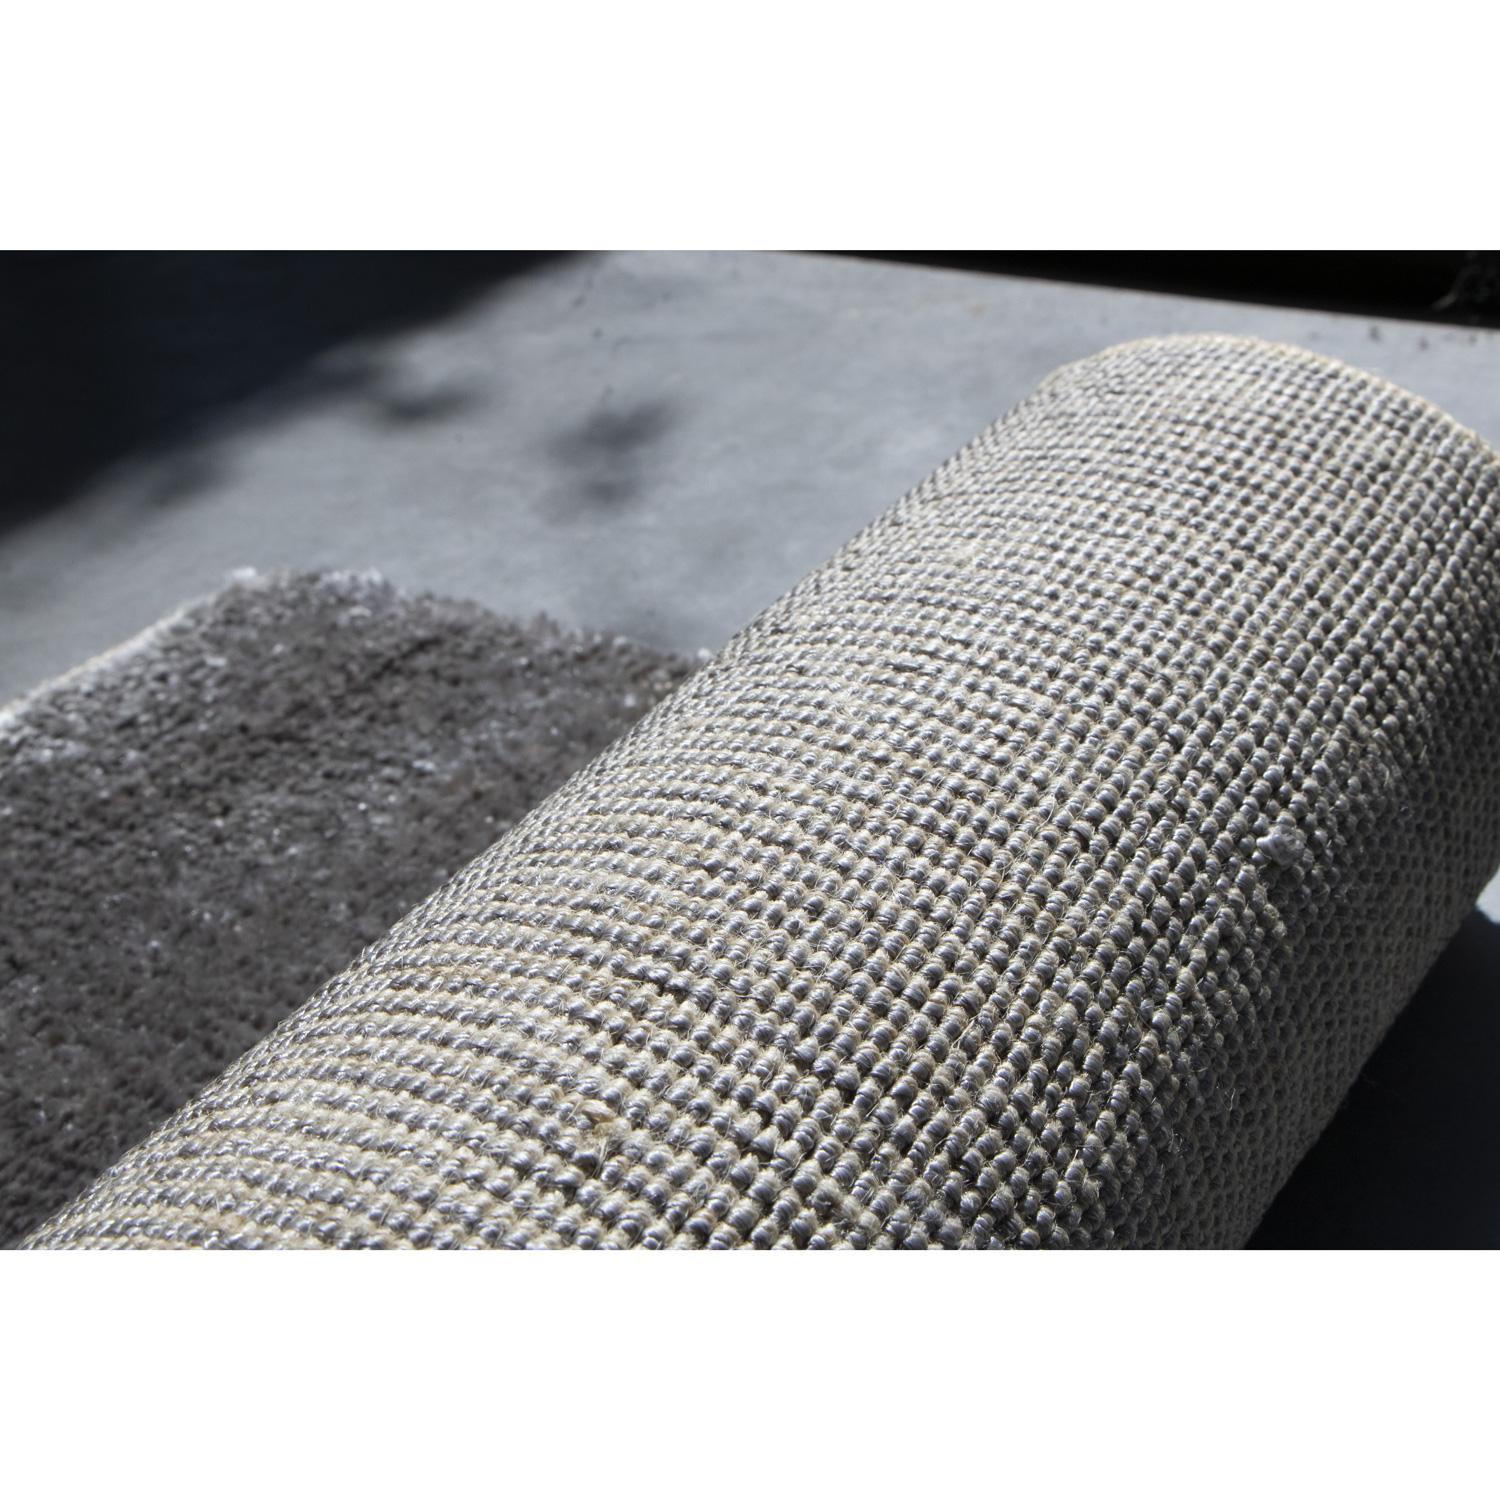 Other 21st Cent Luxury Shiny Velvety Silvery Rug by Deanna Comellini In Stock 60x120cm For Sale